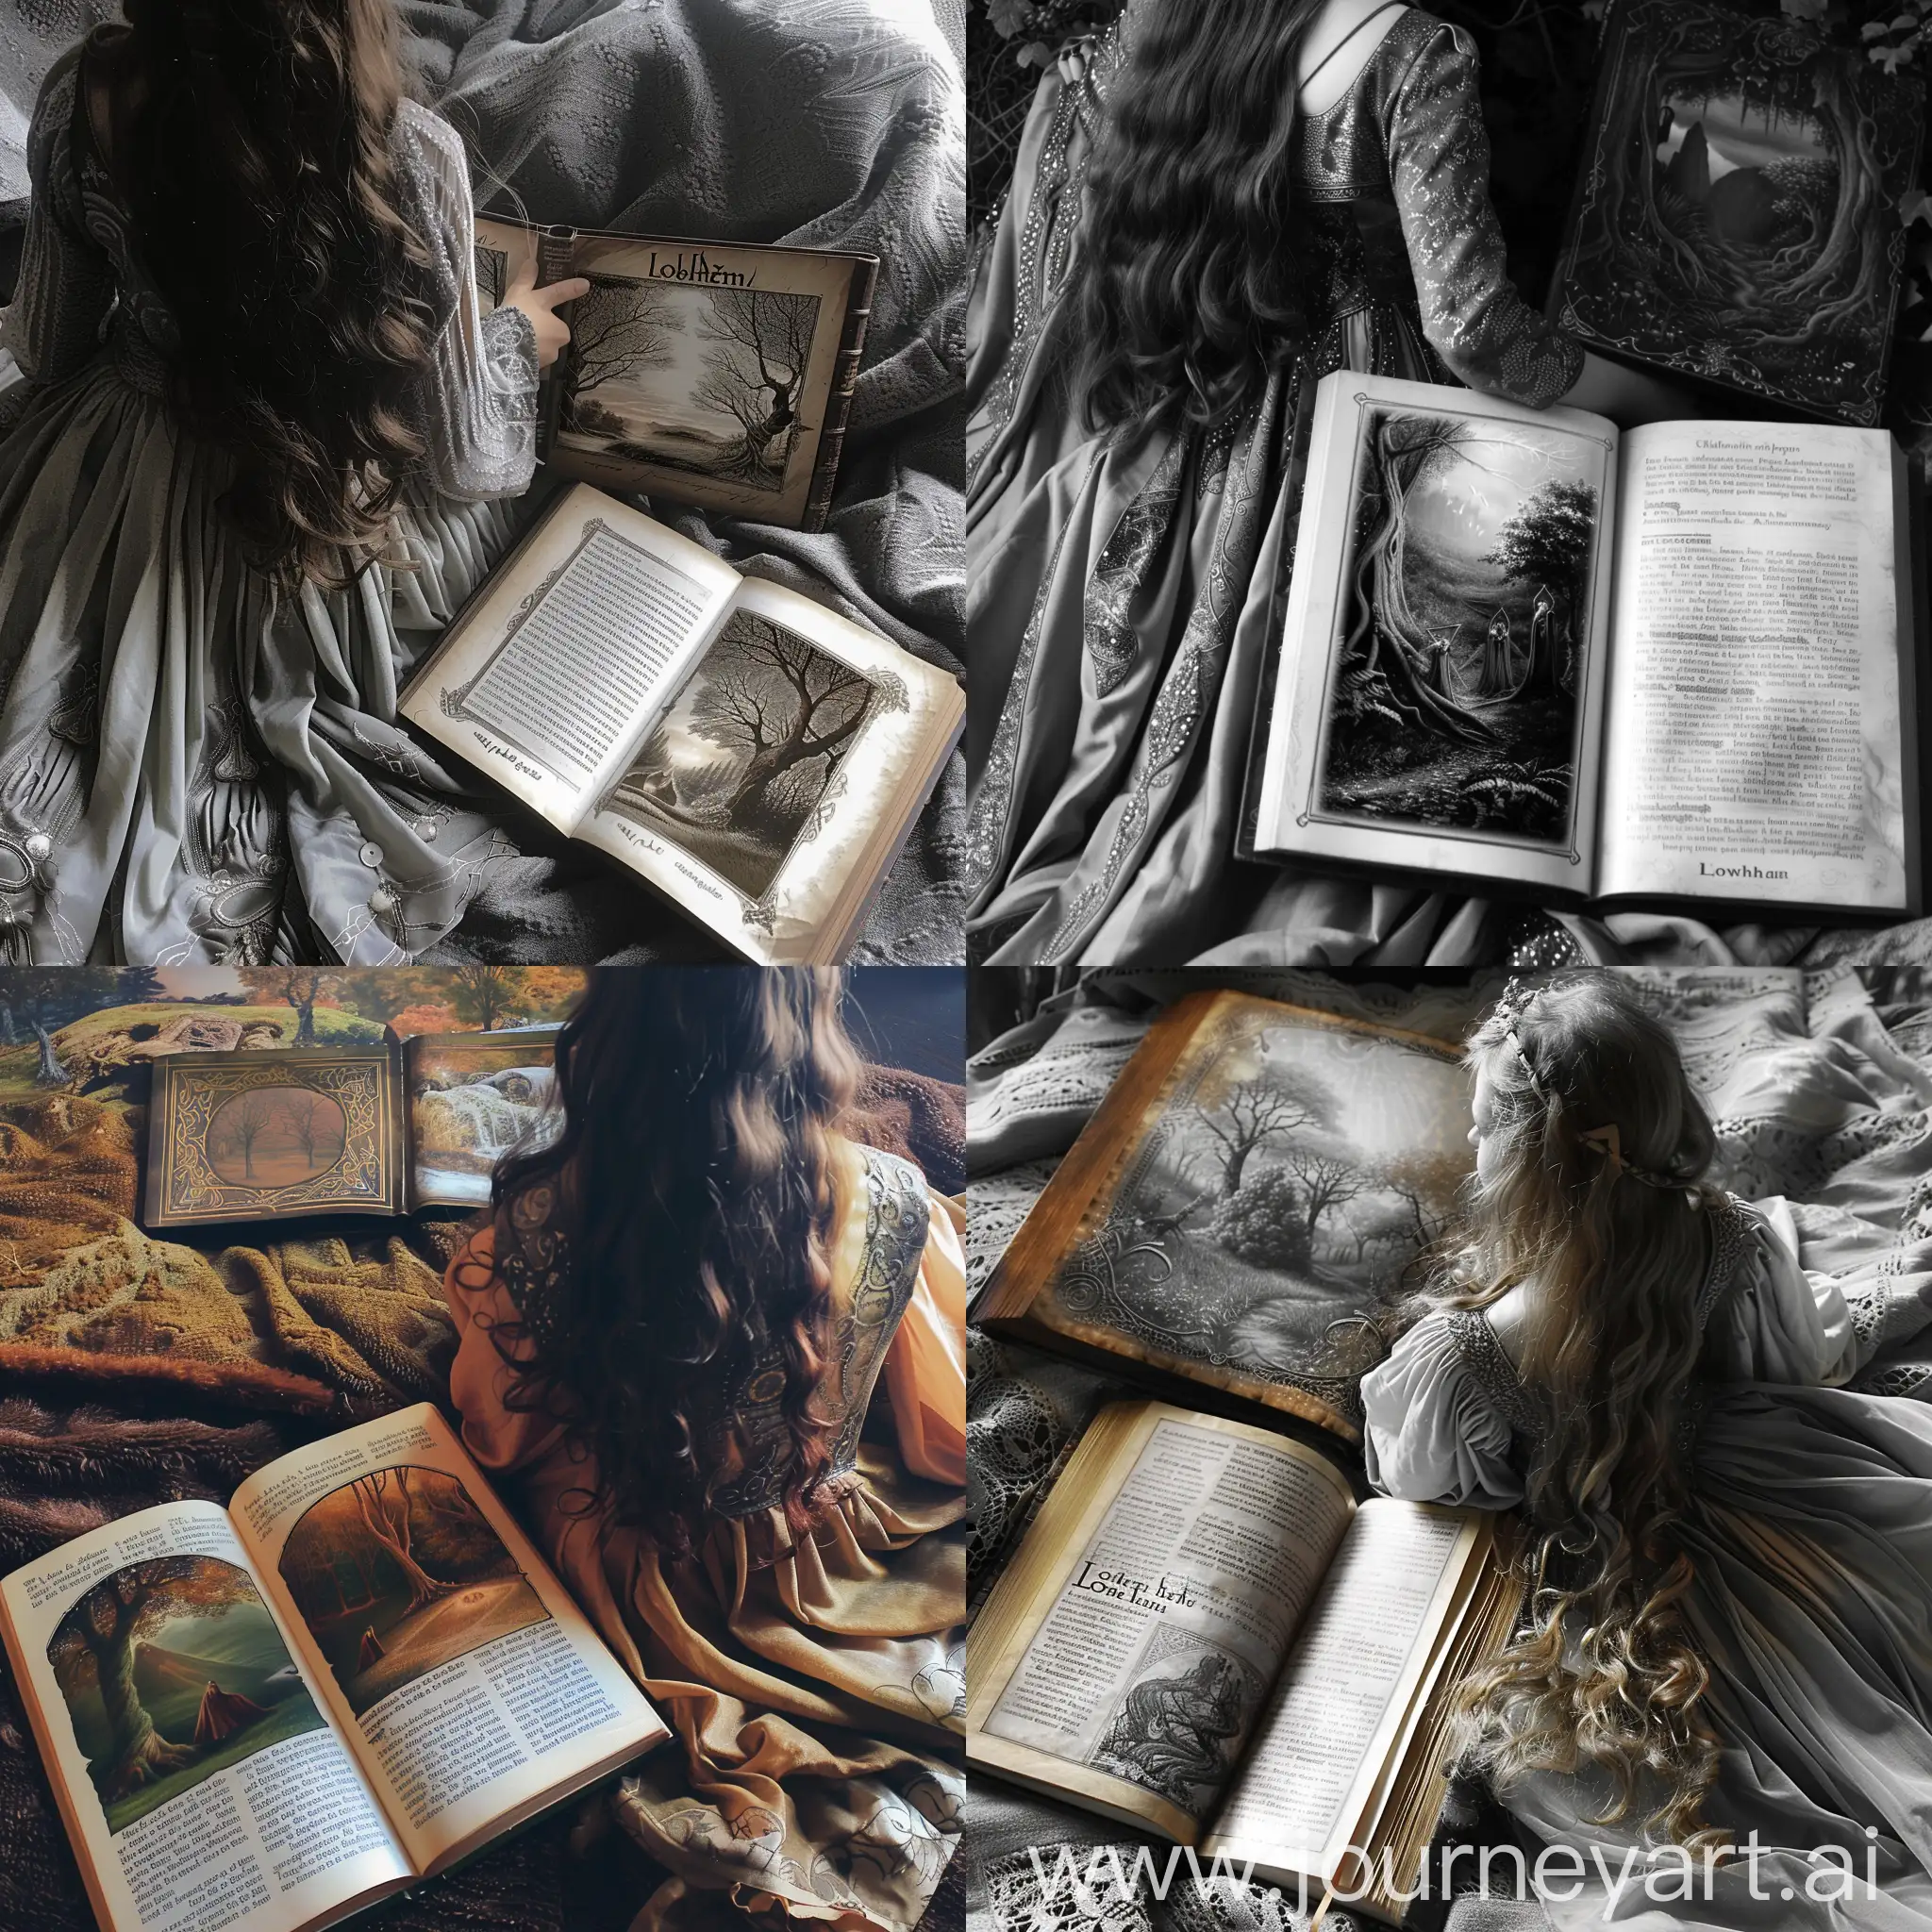 Enchanting-Lothlrien-Scene-with-Elven-Maiden-and-Mystical-Book